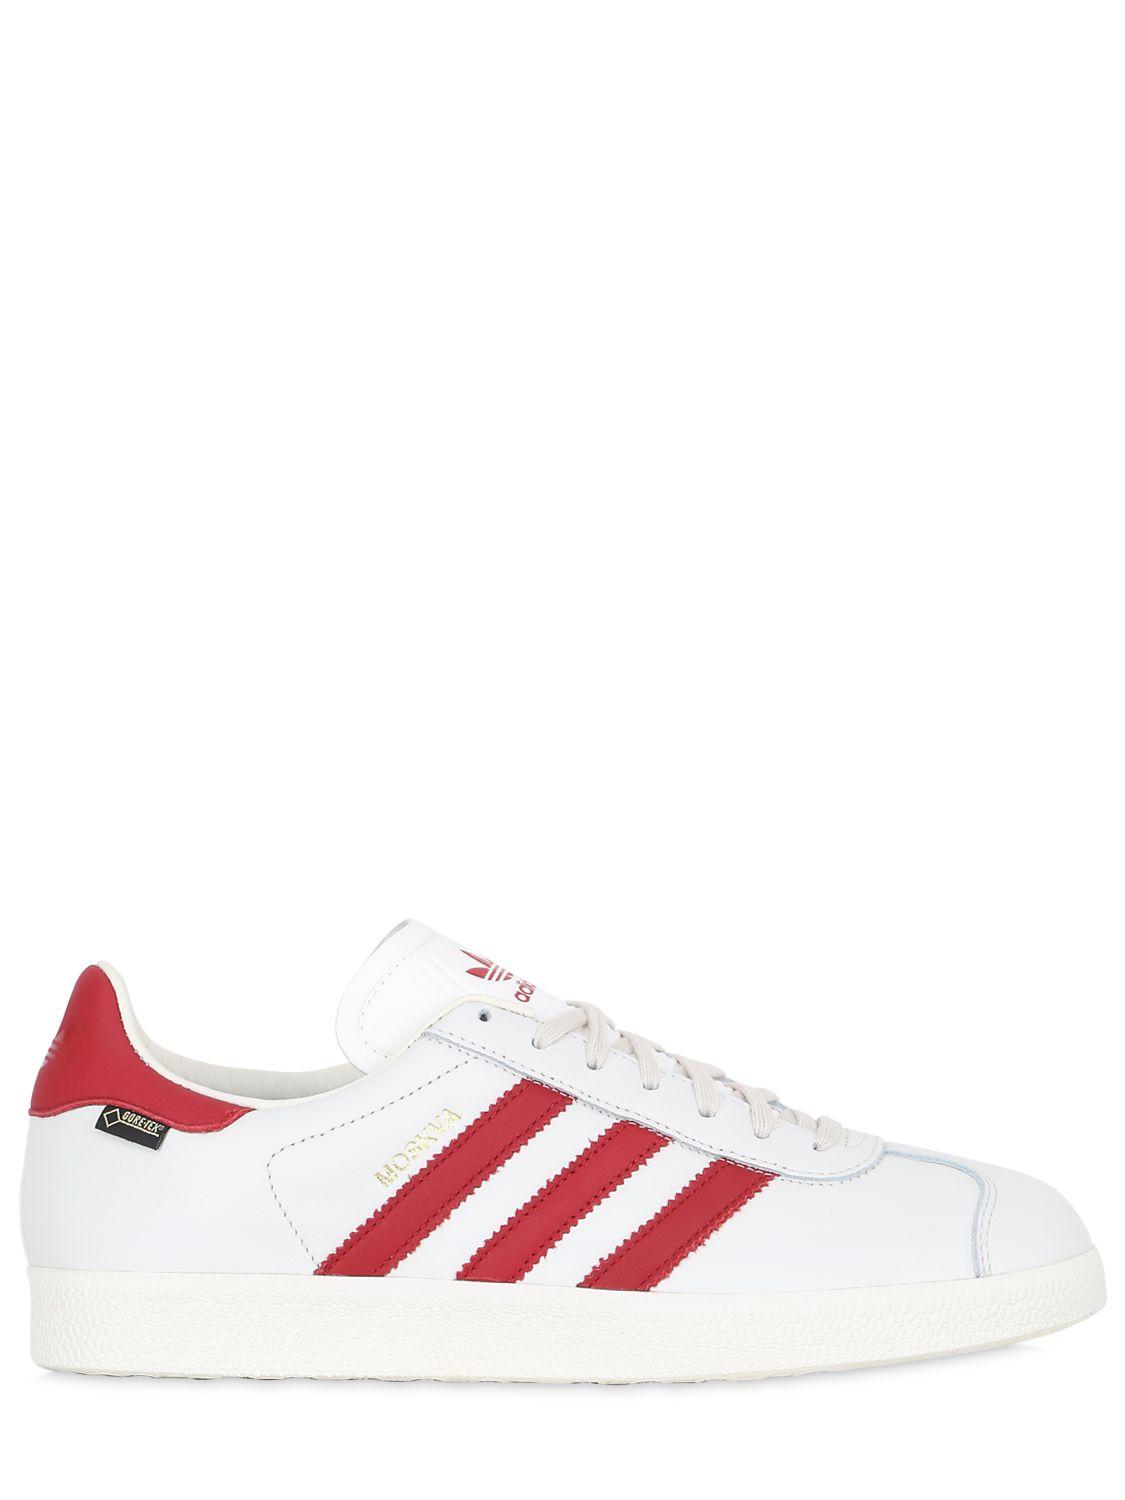 adidas Originals Moscow Gazelle Gore-tex Sneakers in White for Men - Lyst